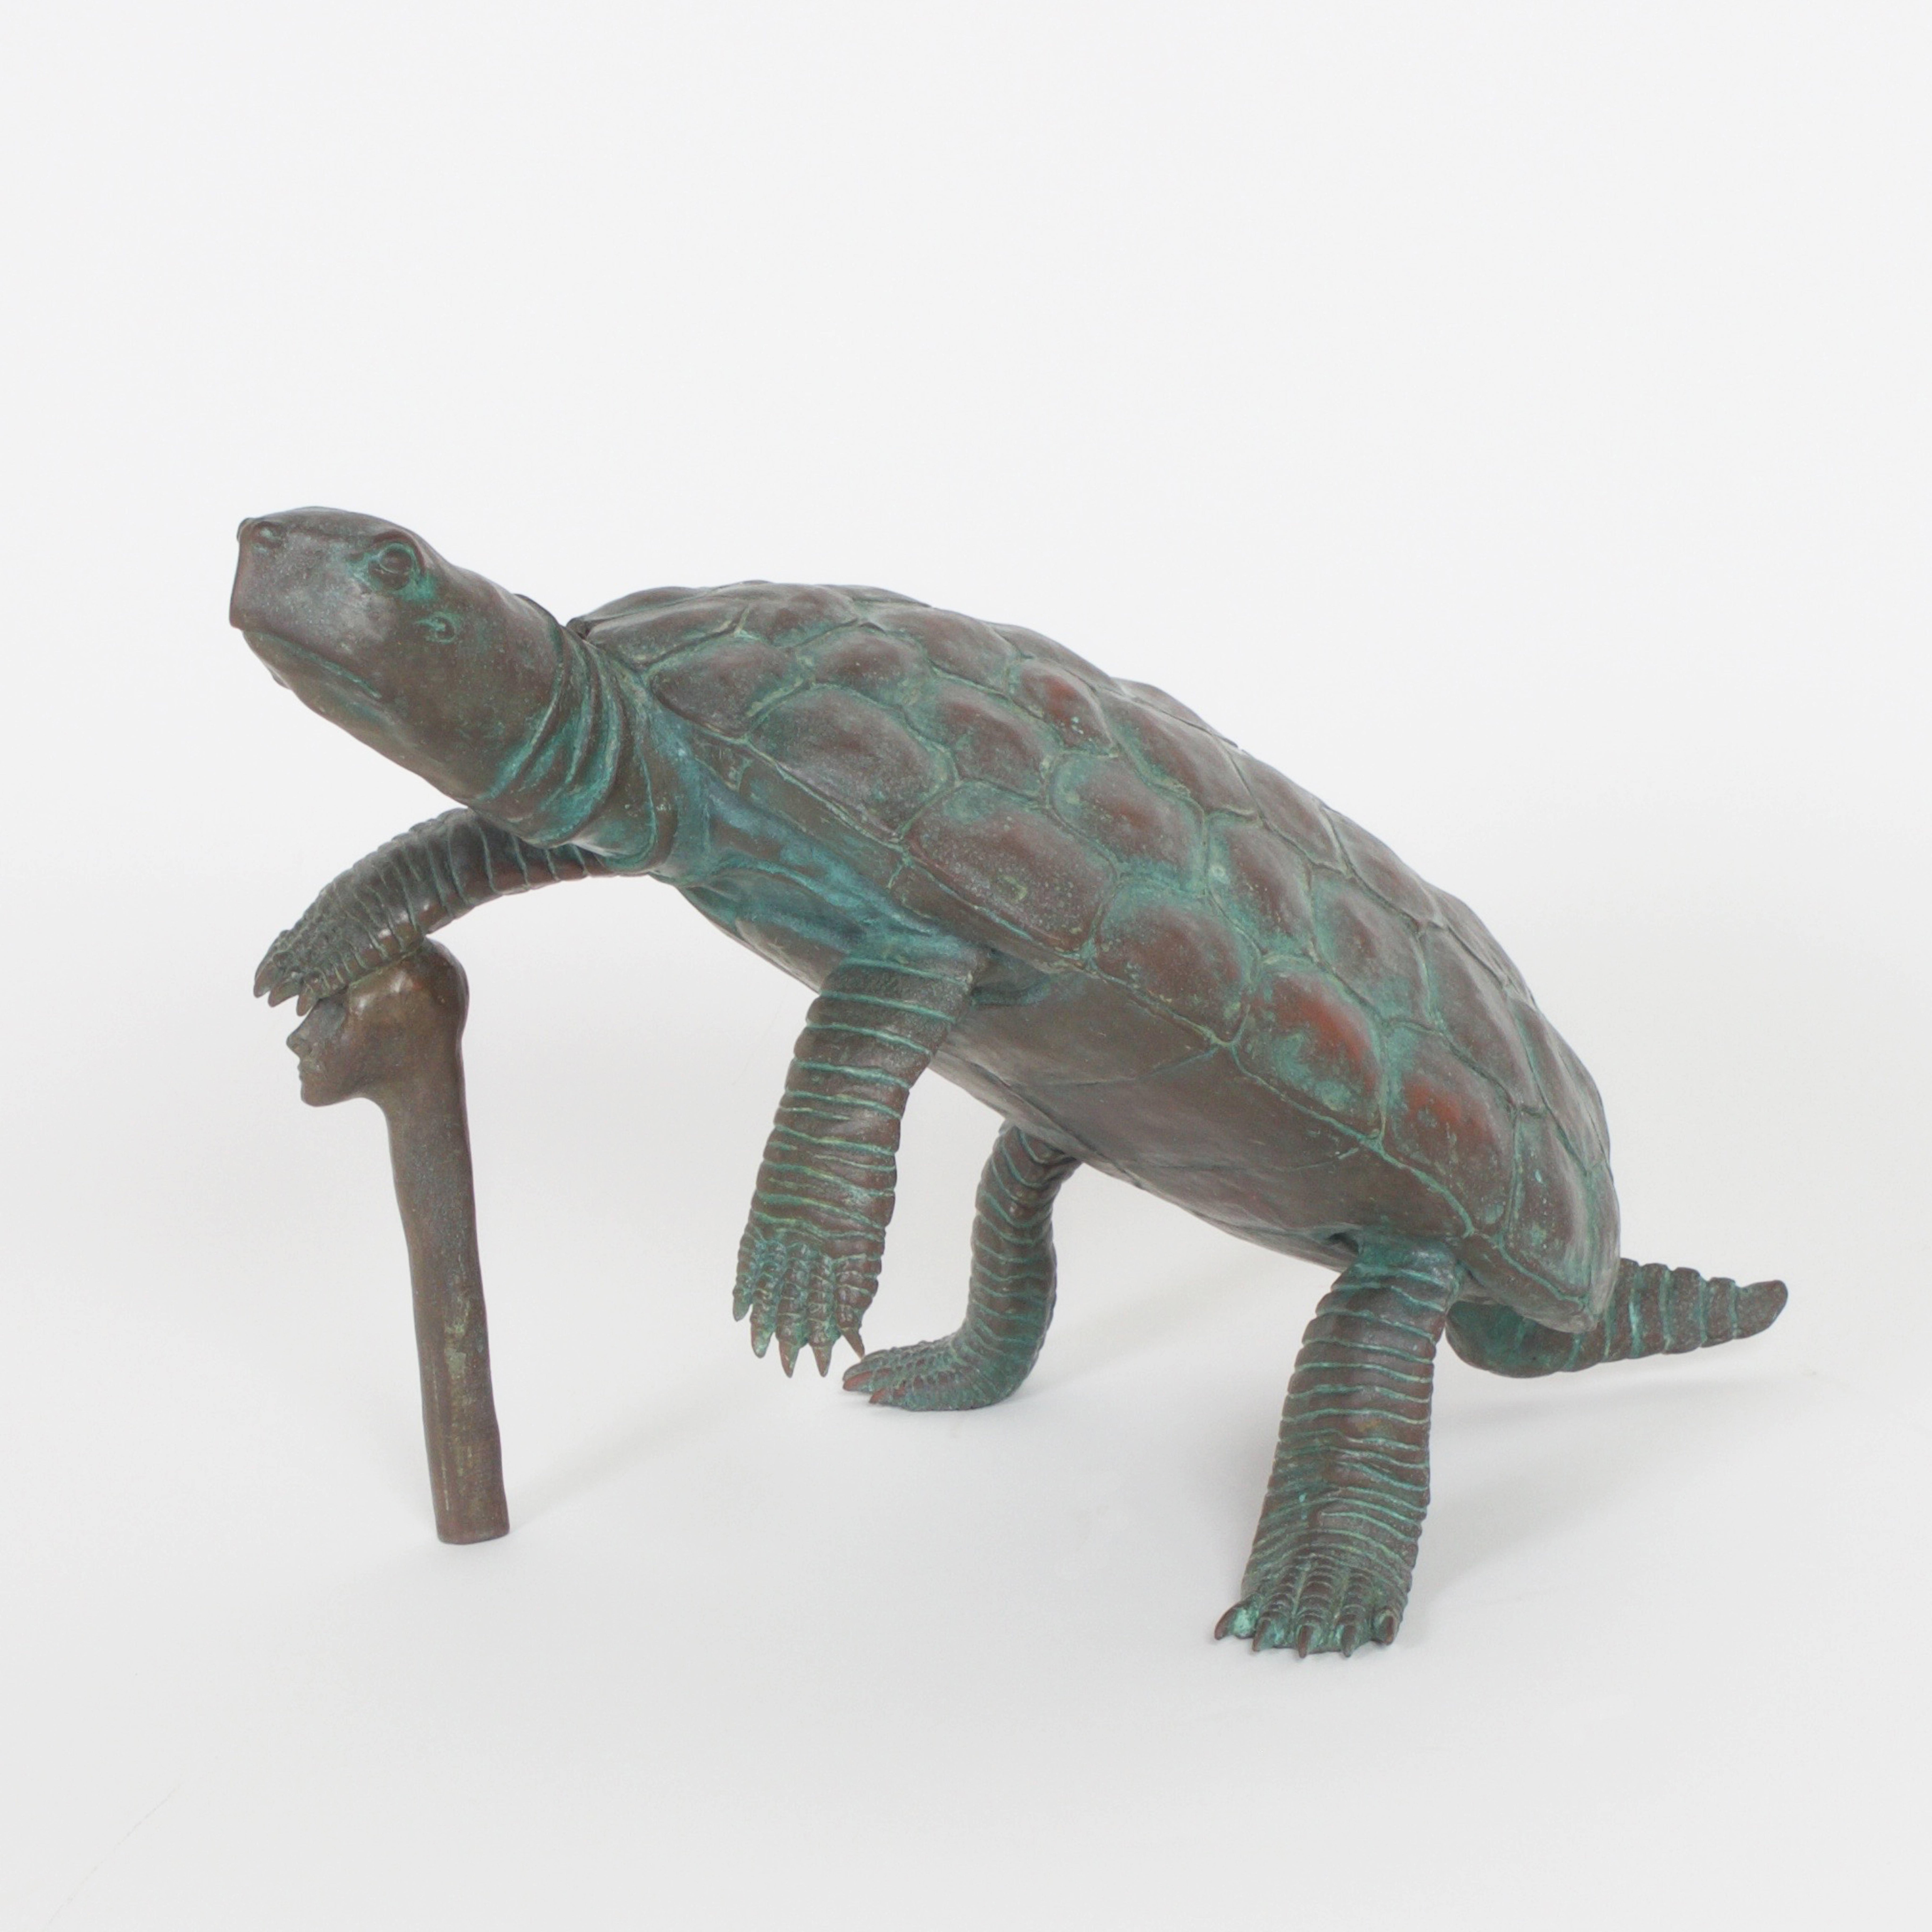 Limited edition Frank Fleming bronze turtle or tortoise standing up right and holding a cane with an ironic human head, like something out of a Beatrix Potter book. Expertly cast and having a Classic verdigris patina. 